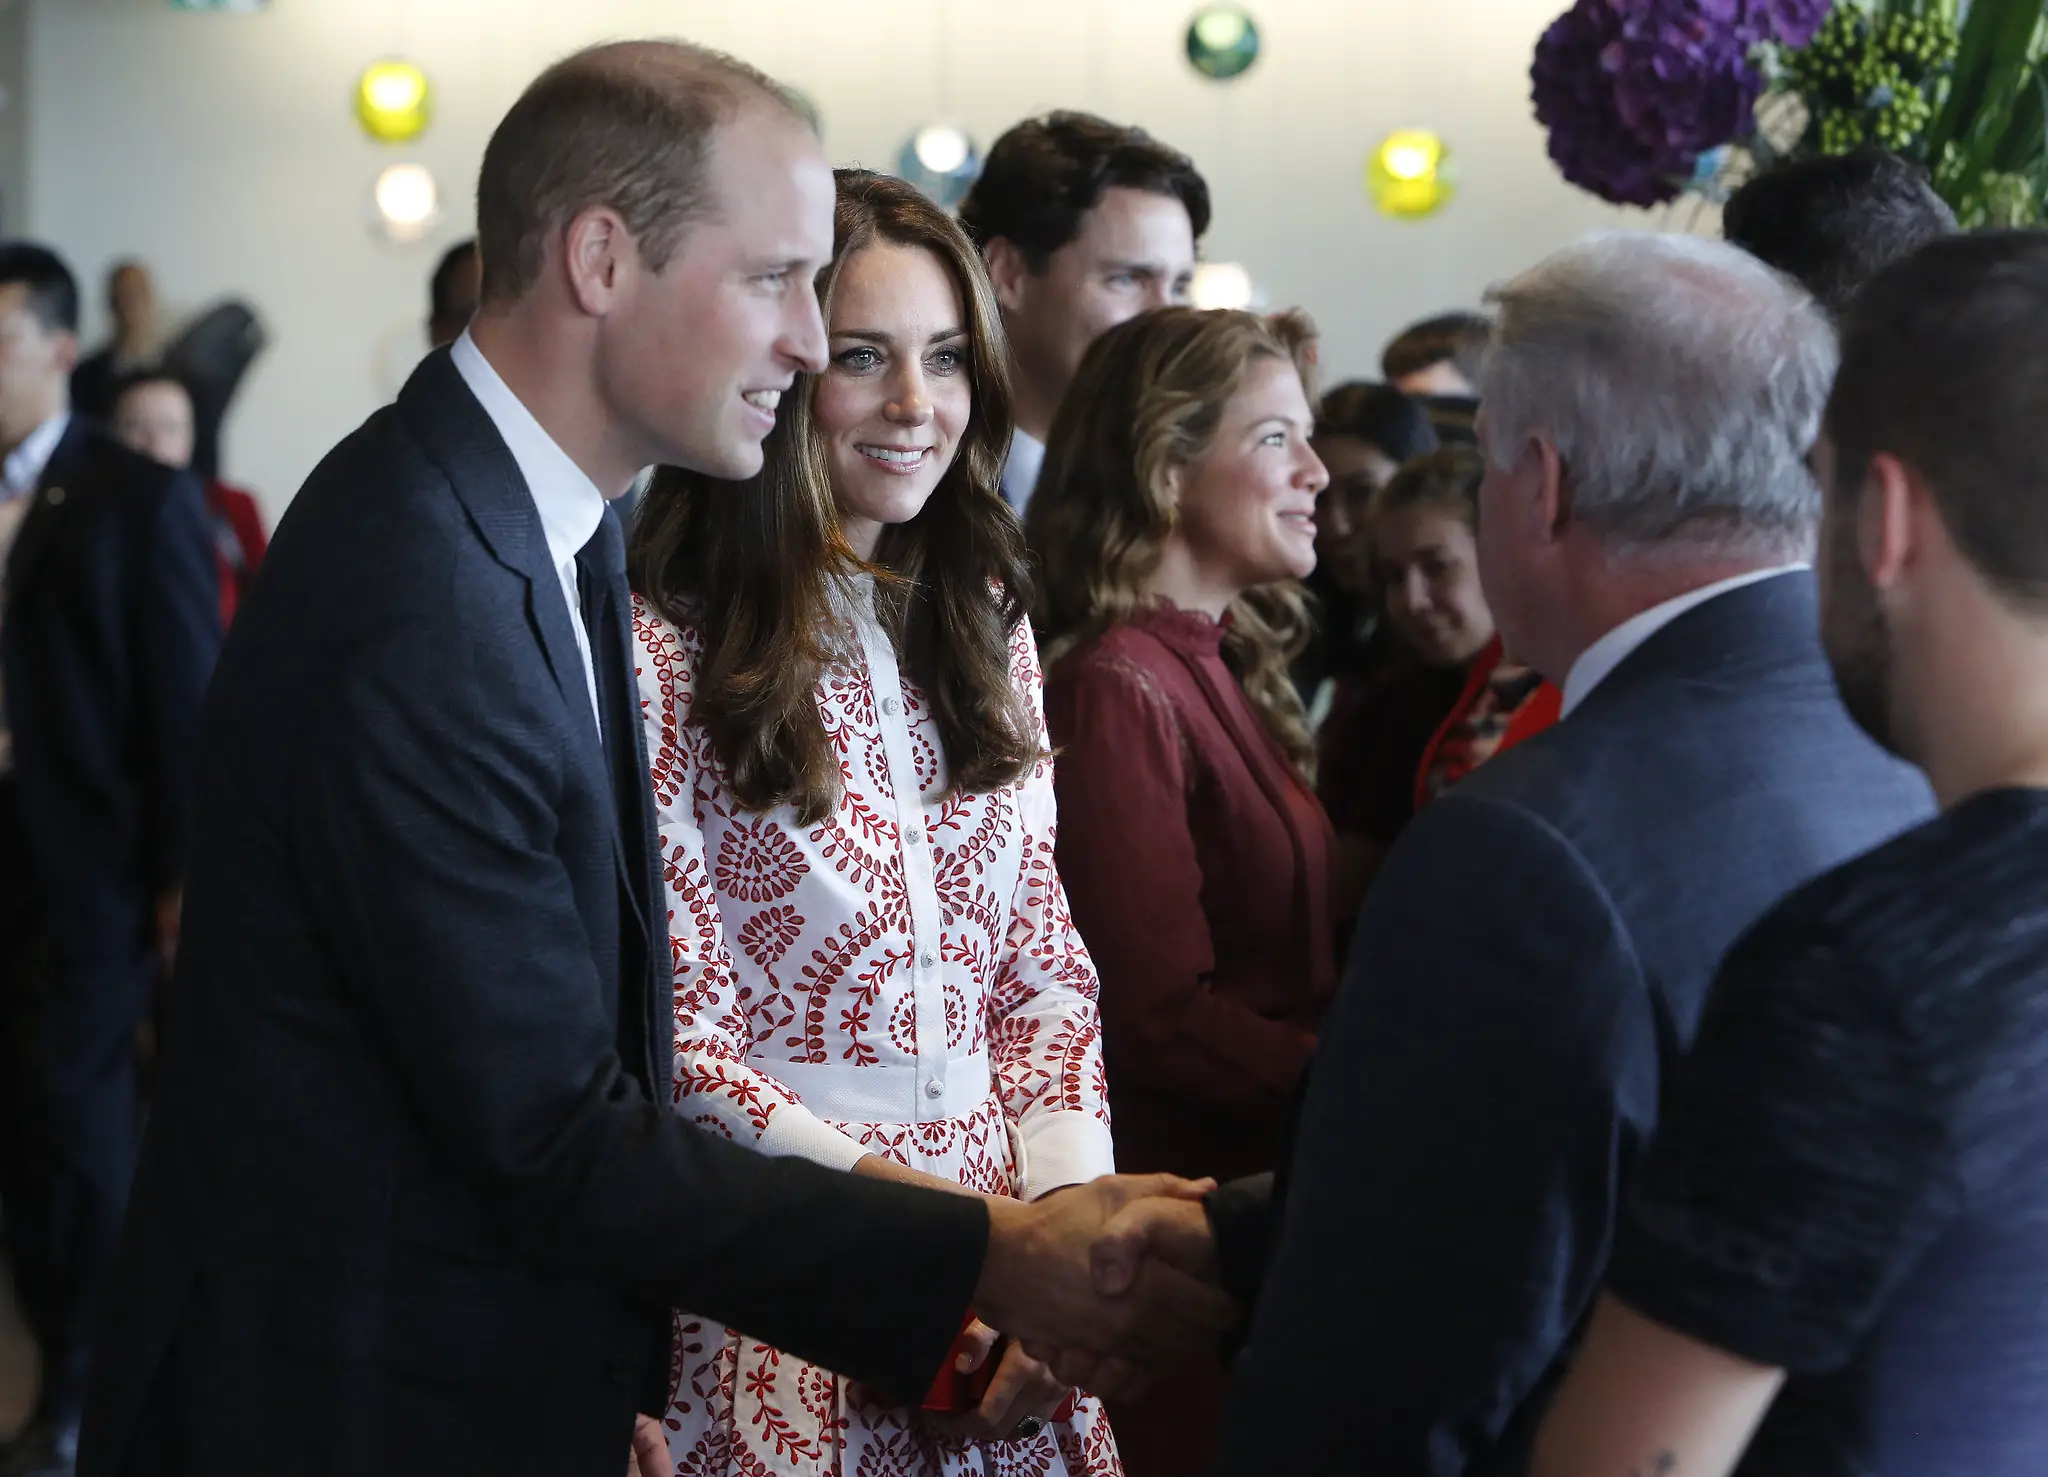 The Duke and Duchess of Cambridge at reception